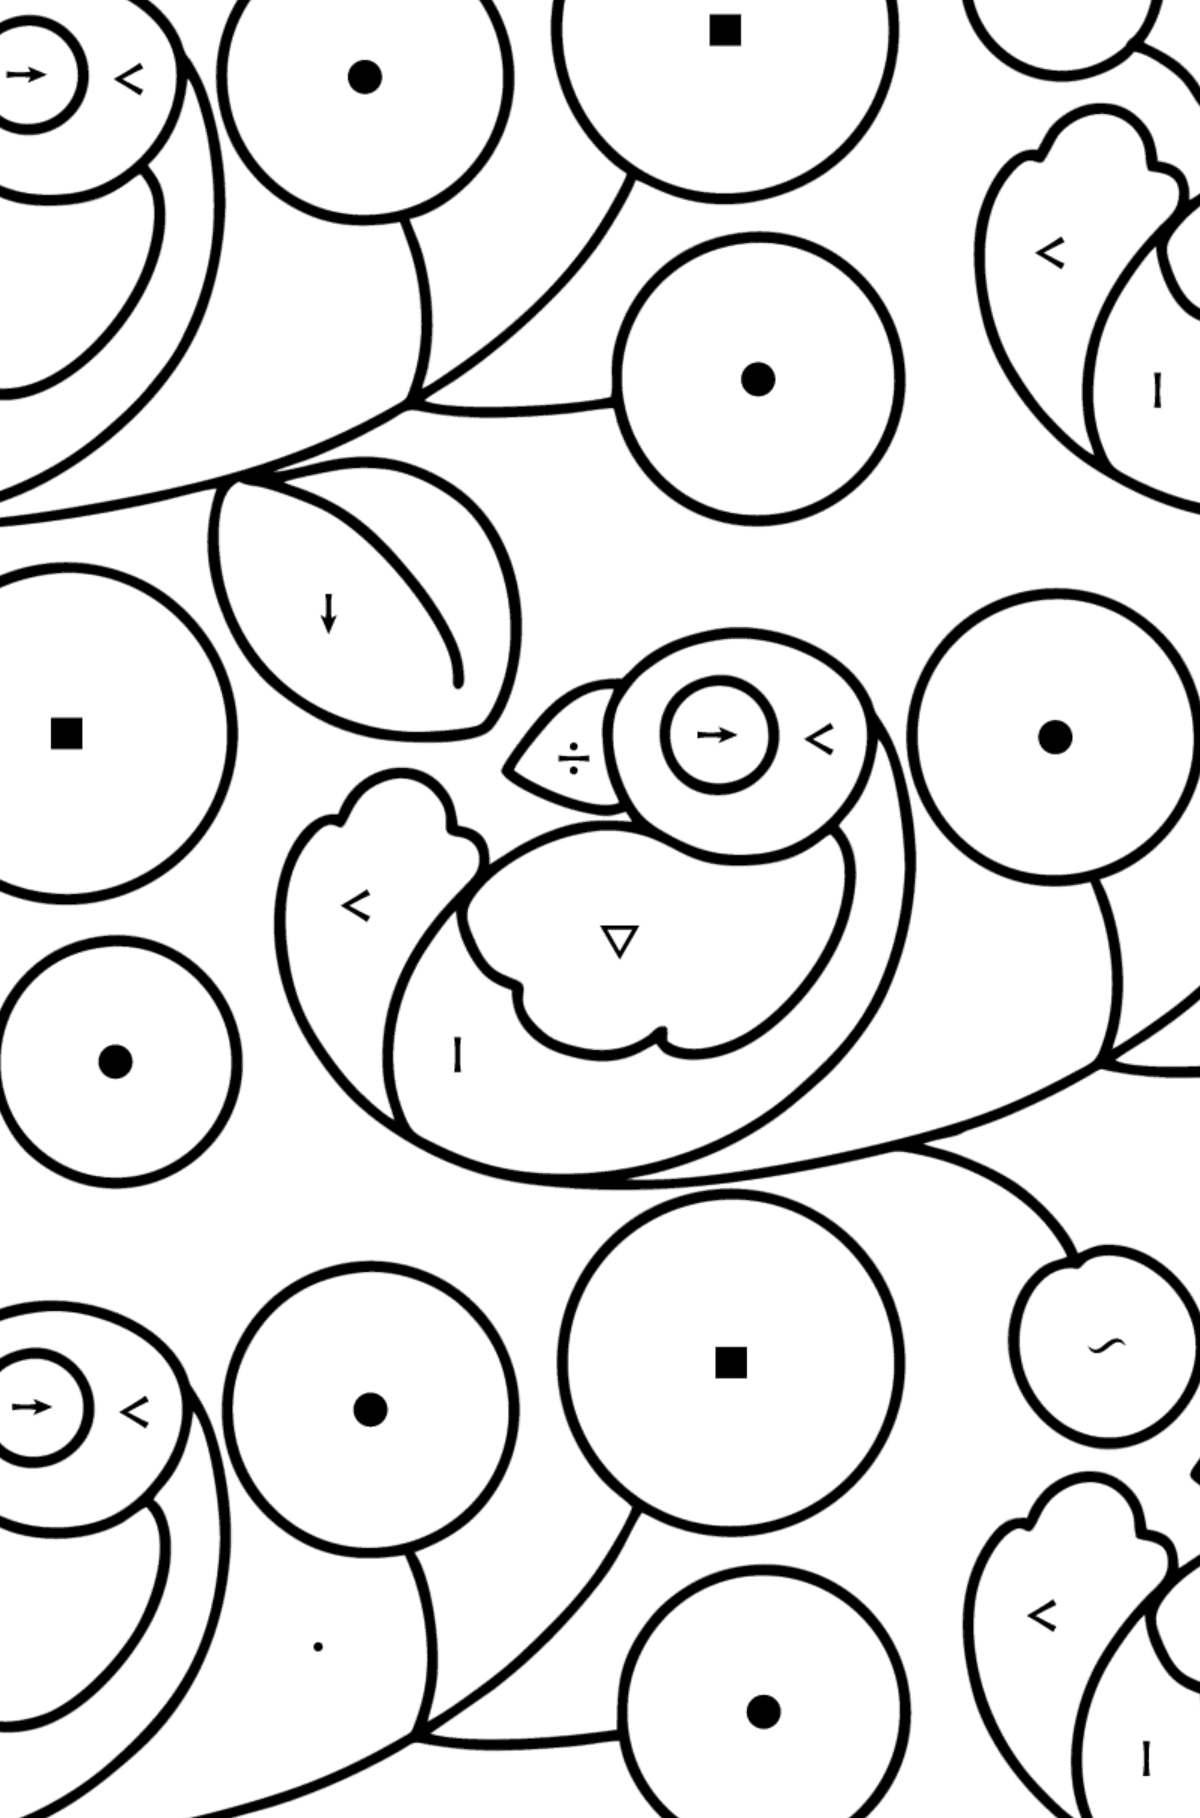 Bird Pattern coloring page - Coloring by Symbols for Kids